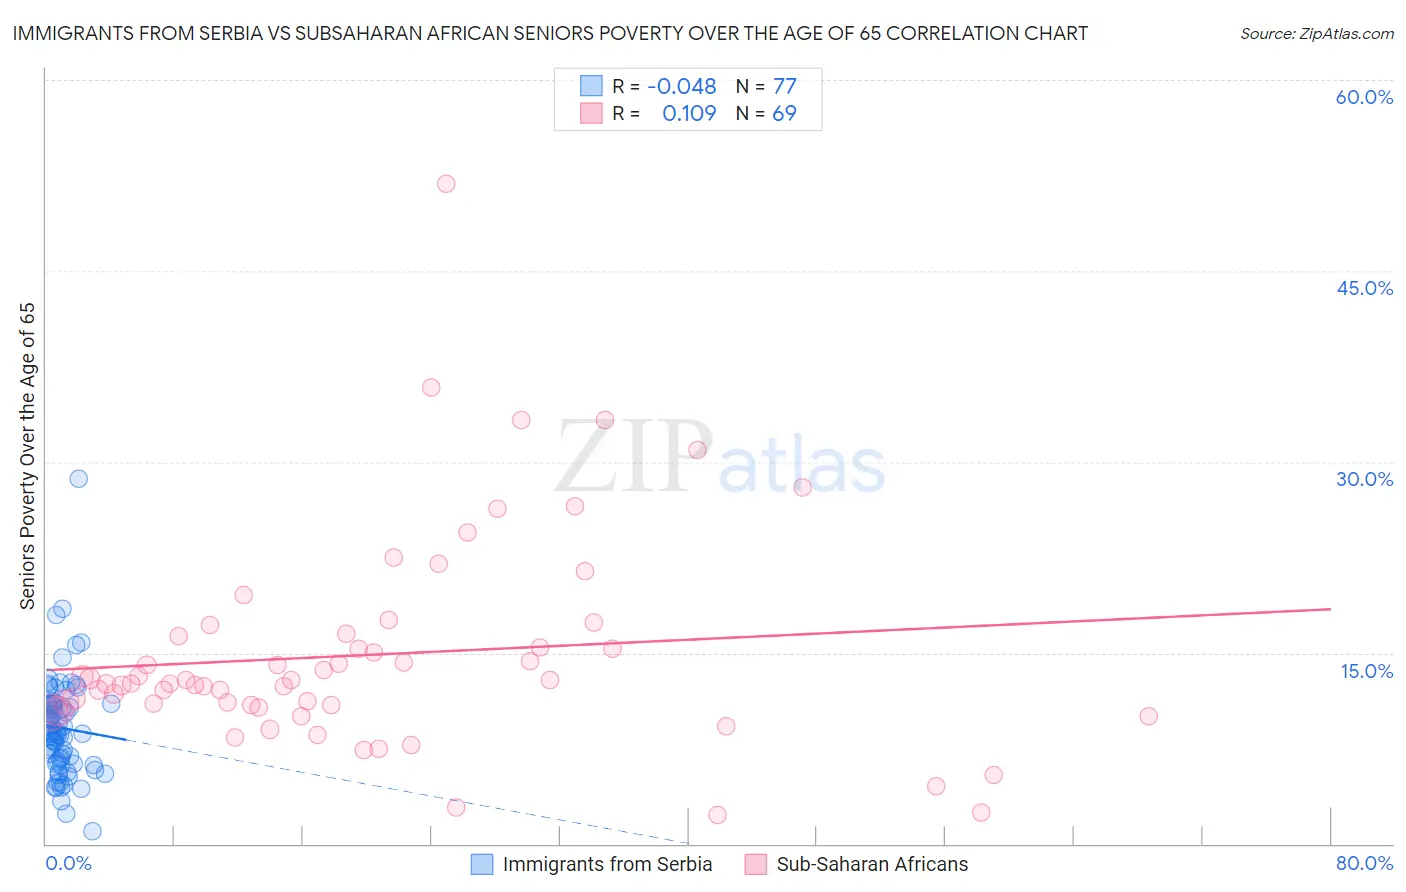 Immigrants from Serbia vs Subsaharan African Seniors Poverty Over the Age of 65